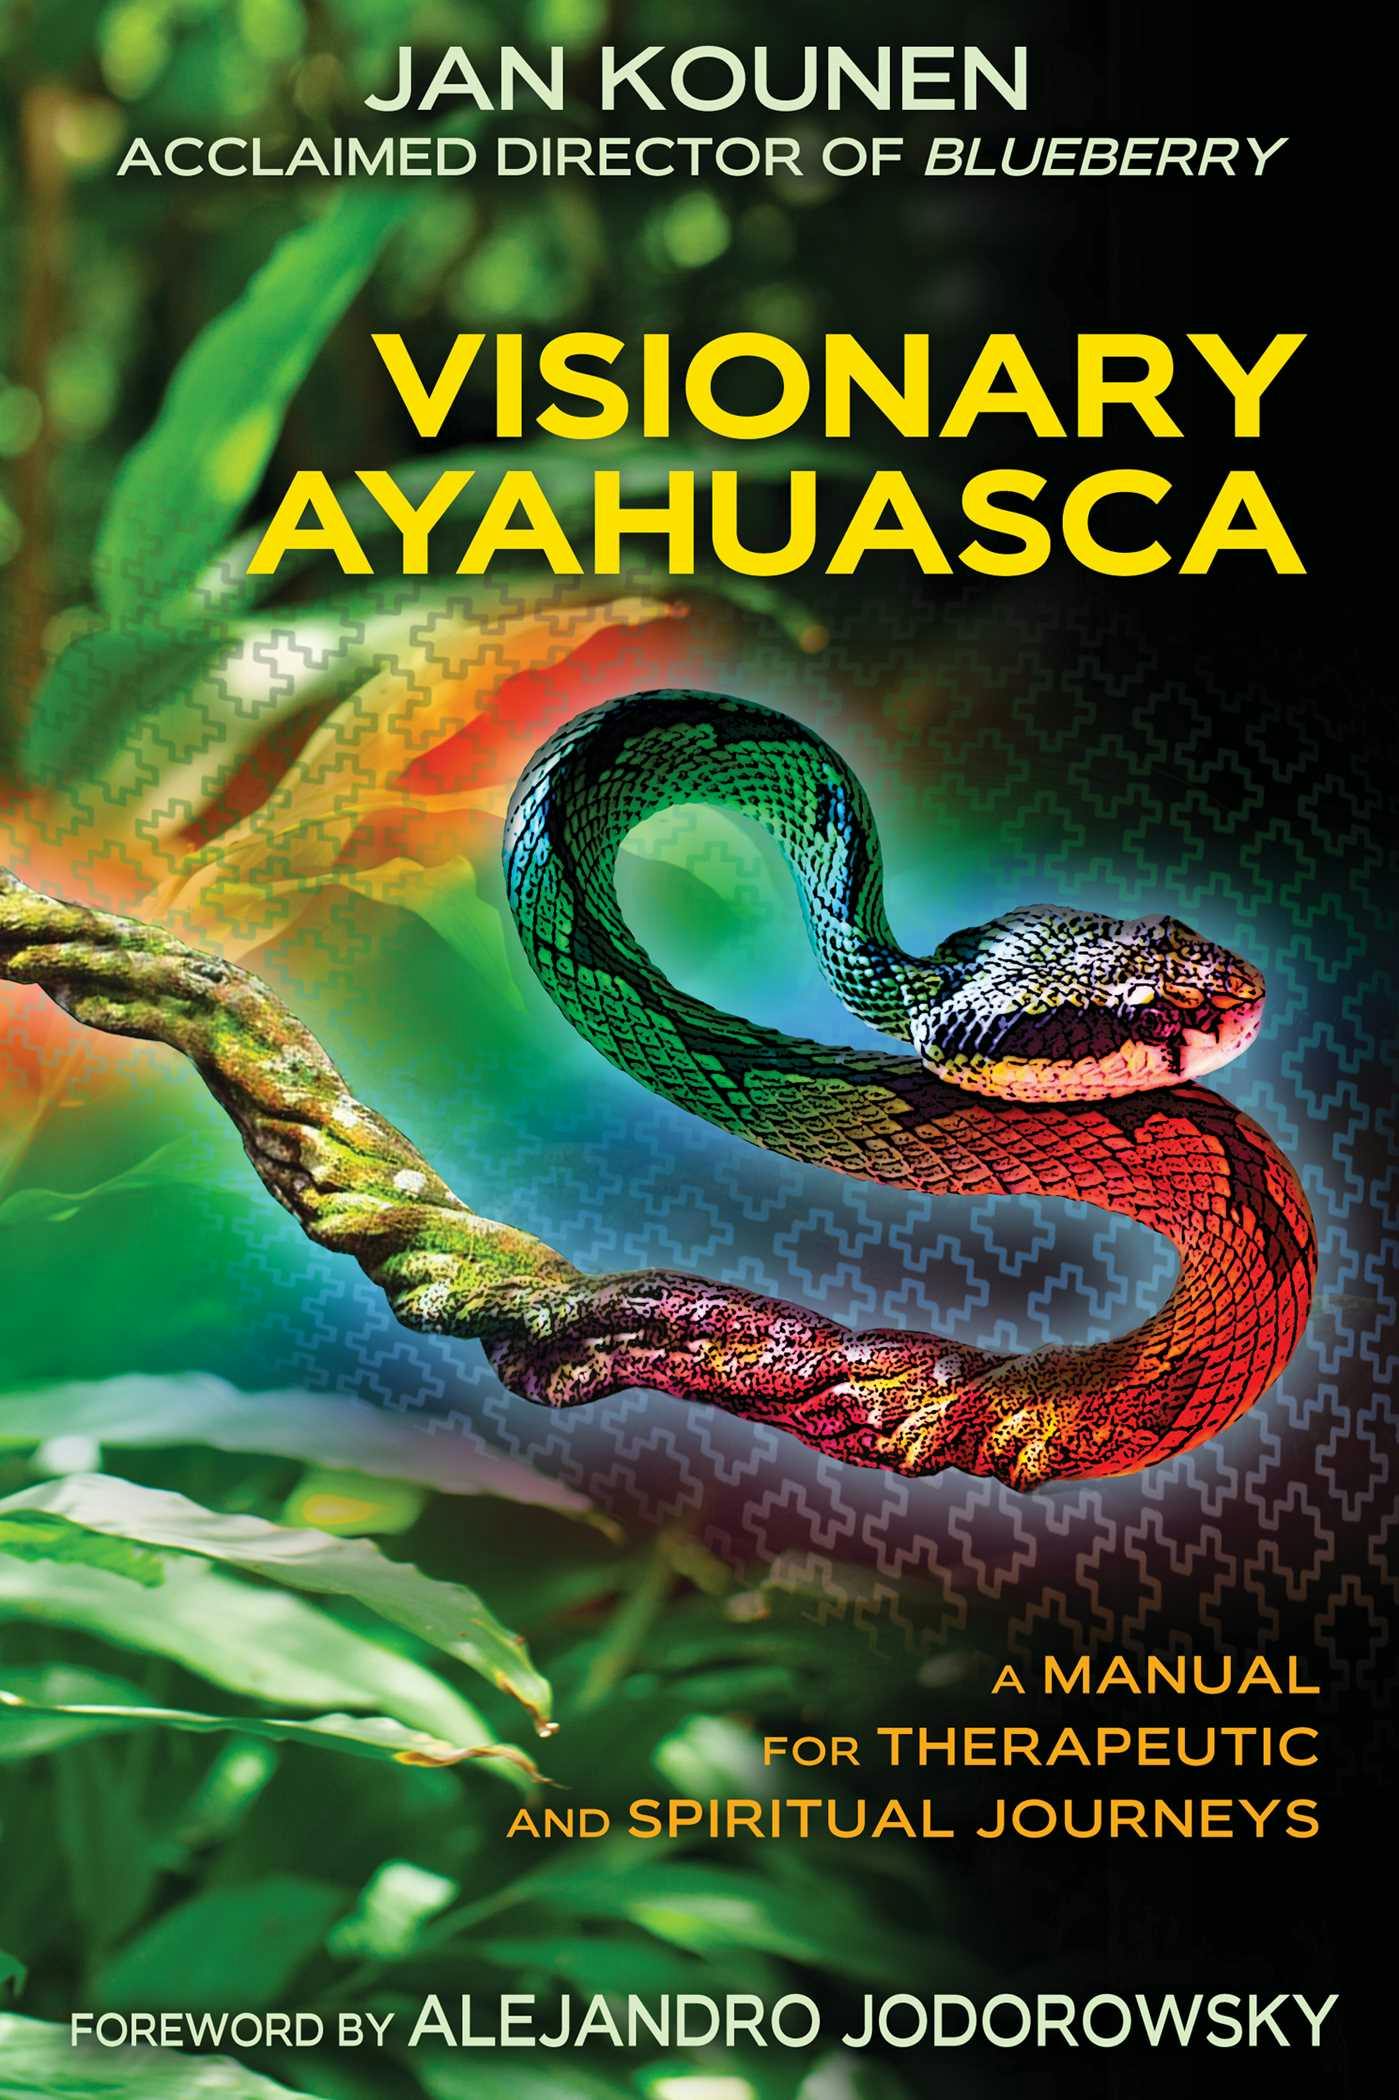 Visionary Ayahuasca: A Manual for Therapeutic and Spiritual Journeys - Jan Kounen